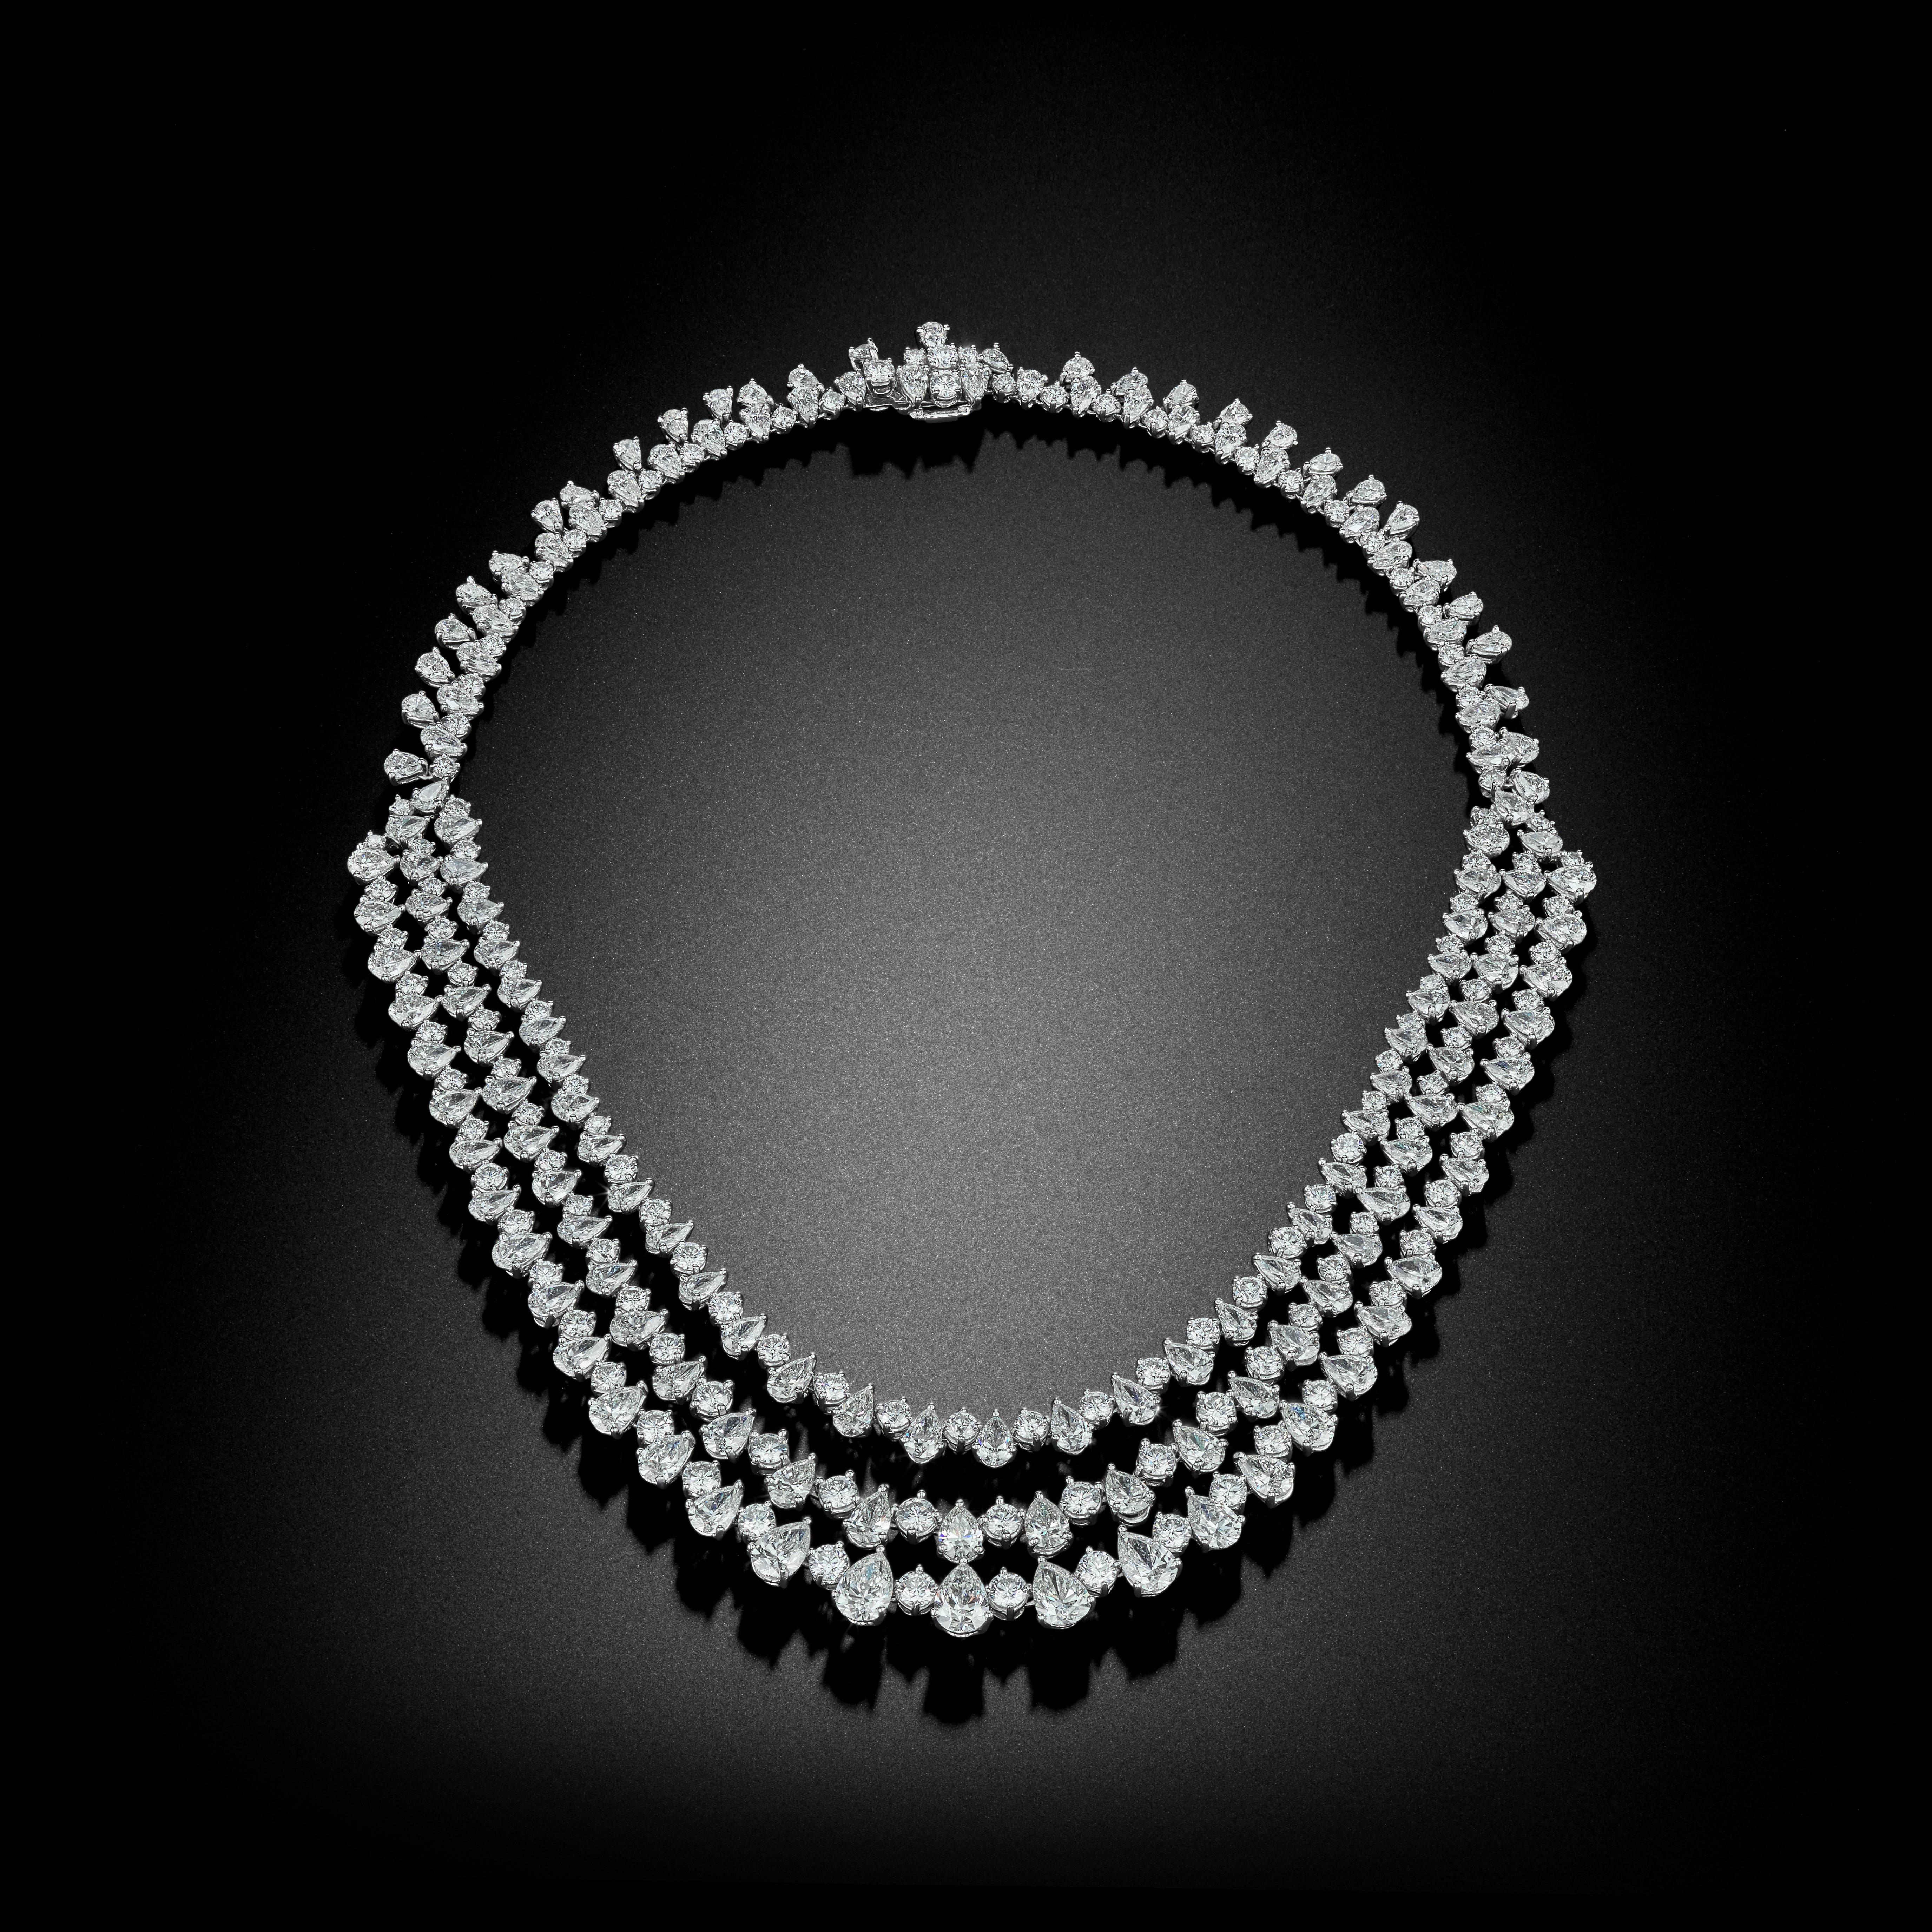 A stunning masterpiece to complete any collection. This captivating necklace features over 80 Carats of some of David Rosenberg's most exceptional Diamonds. Crowned in Platinum, bands of alternating Teardrop Pear Shape and Round Brilliant Diamonds